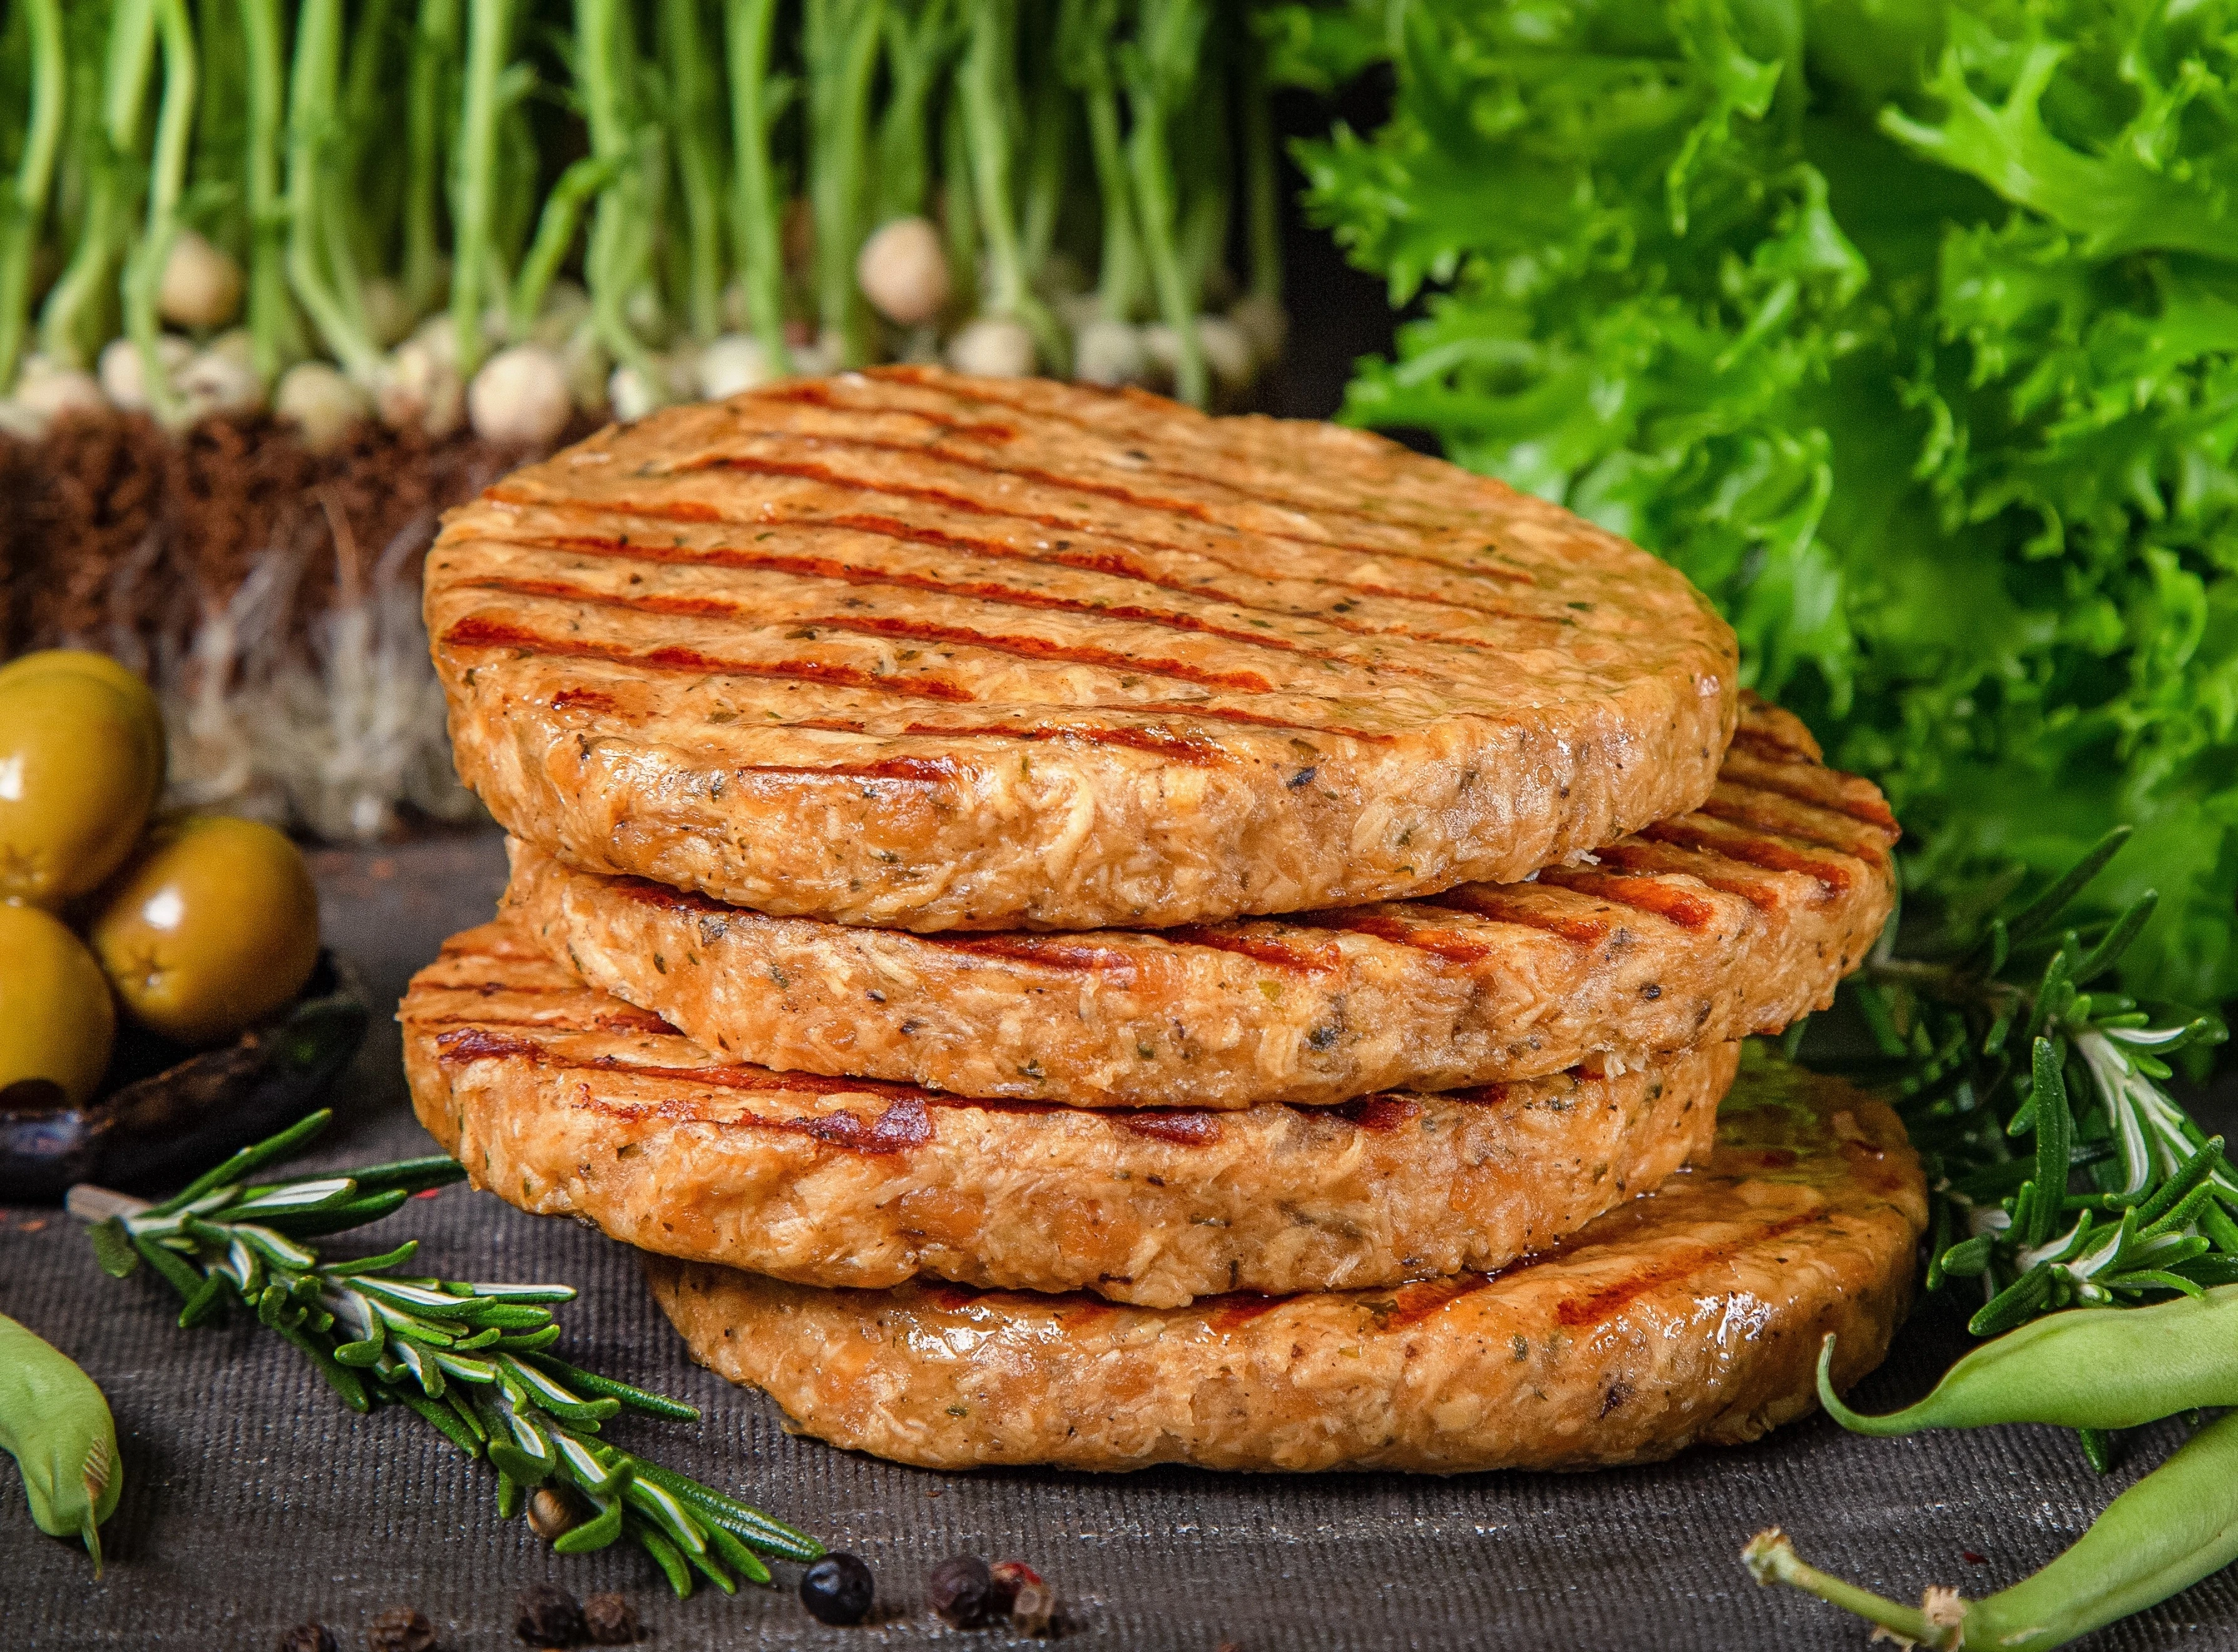 Frozen Vegan Burger Patty plant based food reach in protein , halal ISO and HACCP certified